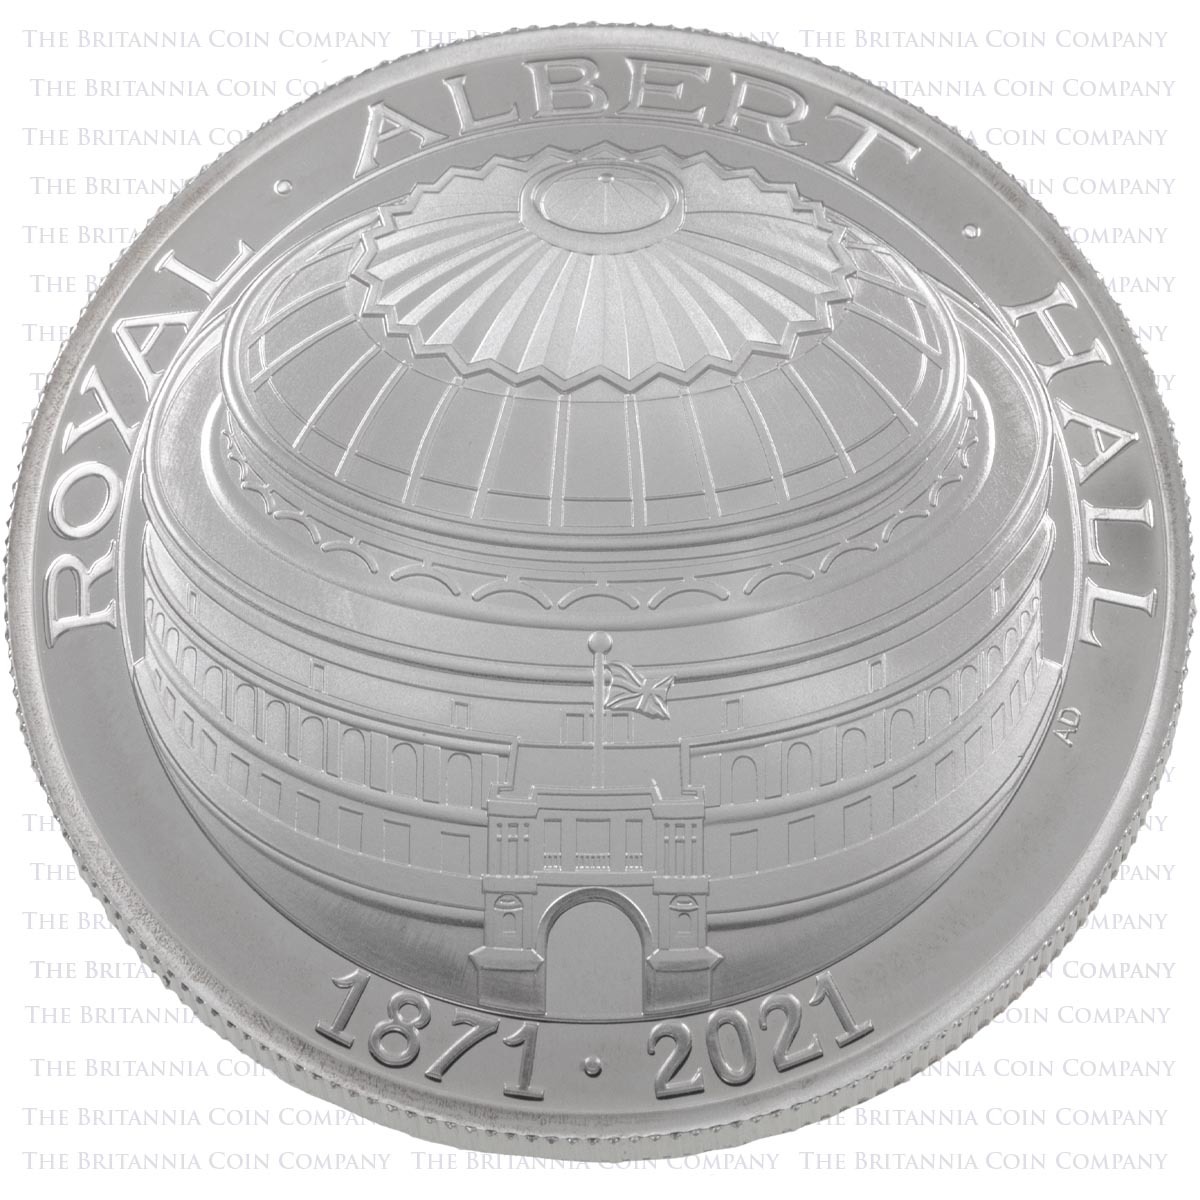 UK21AHSD 2021 Royal Albert Hall Domed Five Pound Crown Silver Proof Coin Reverse